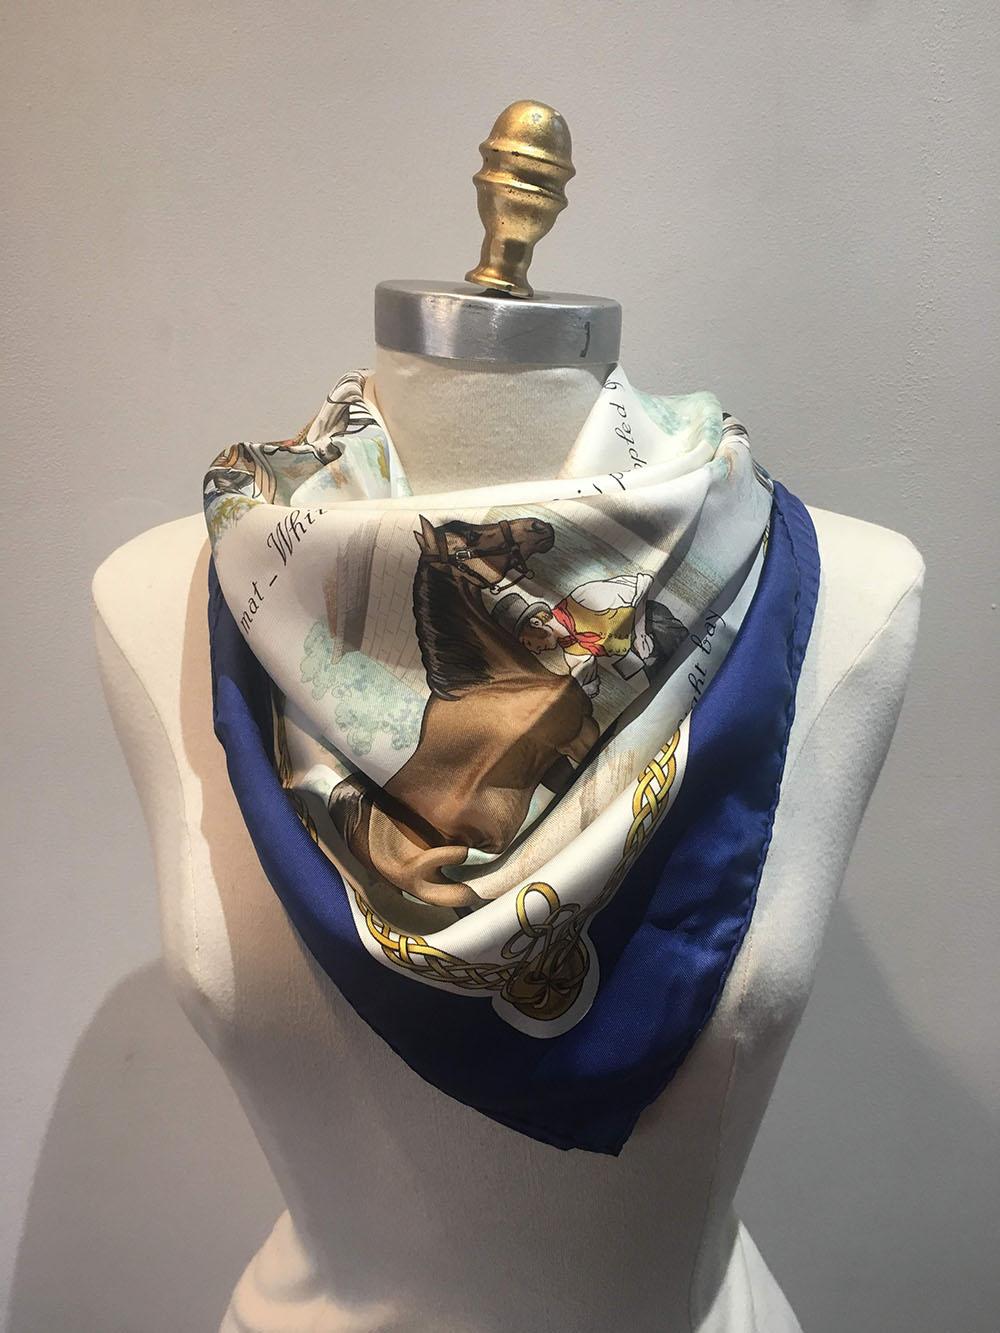 CLASSIC Hermes vintage les robes silk scarf in very good condition. Original silk screen design by Philippe Ledoux c1968 features 9 illustrations of various show horse dressings over an ivory background and surrounded by a navy blue border. 100%